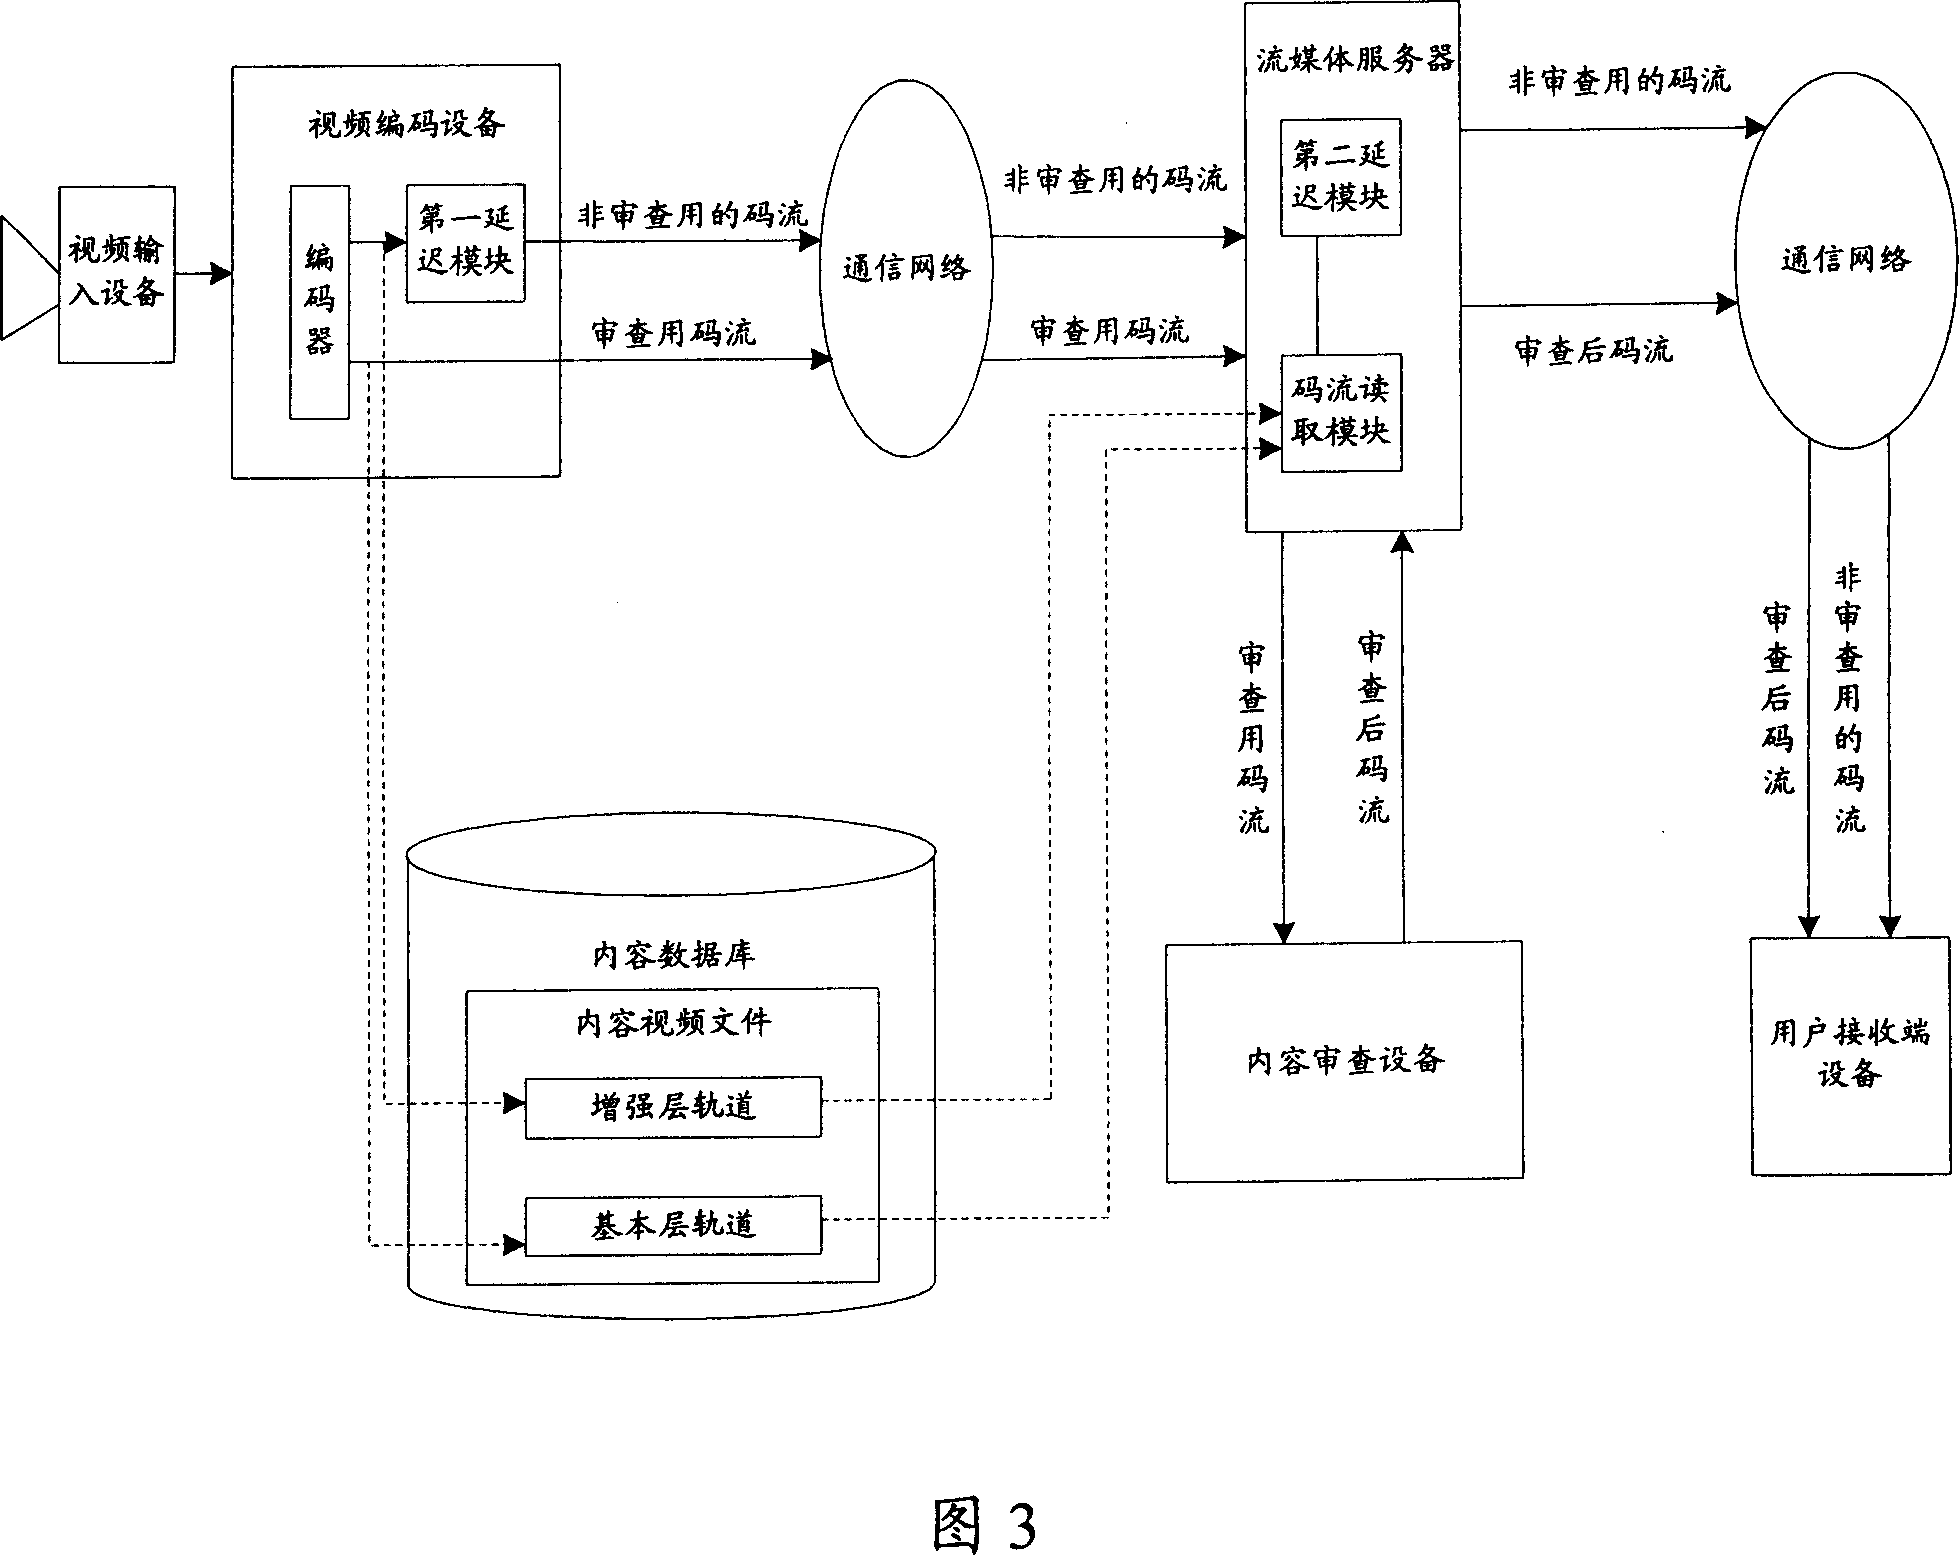 User terminal equipment for stream media content checking and checking method